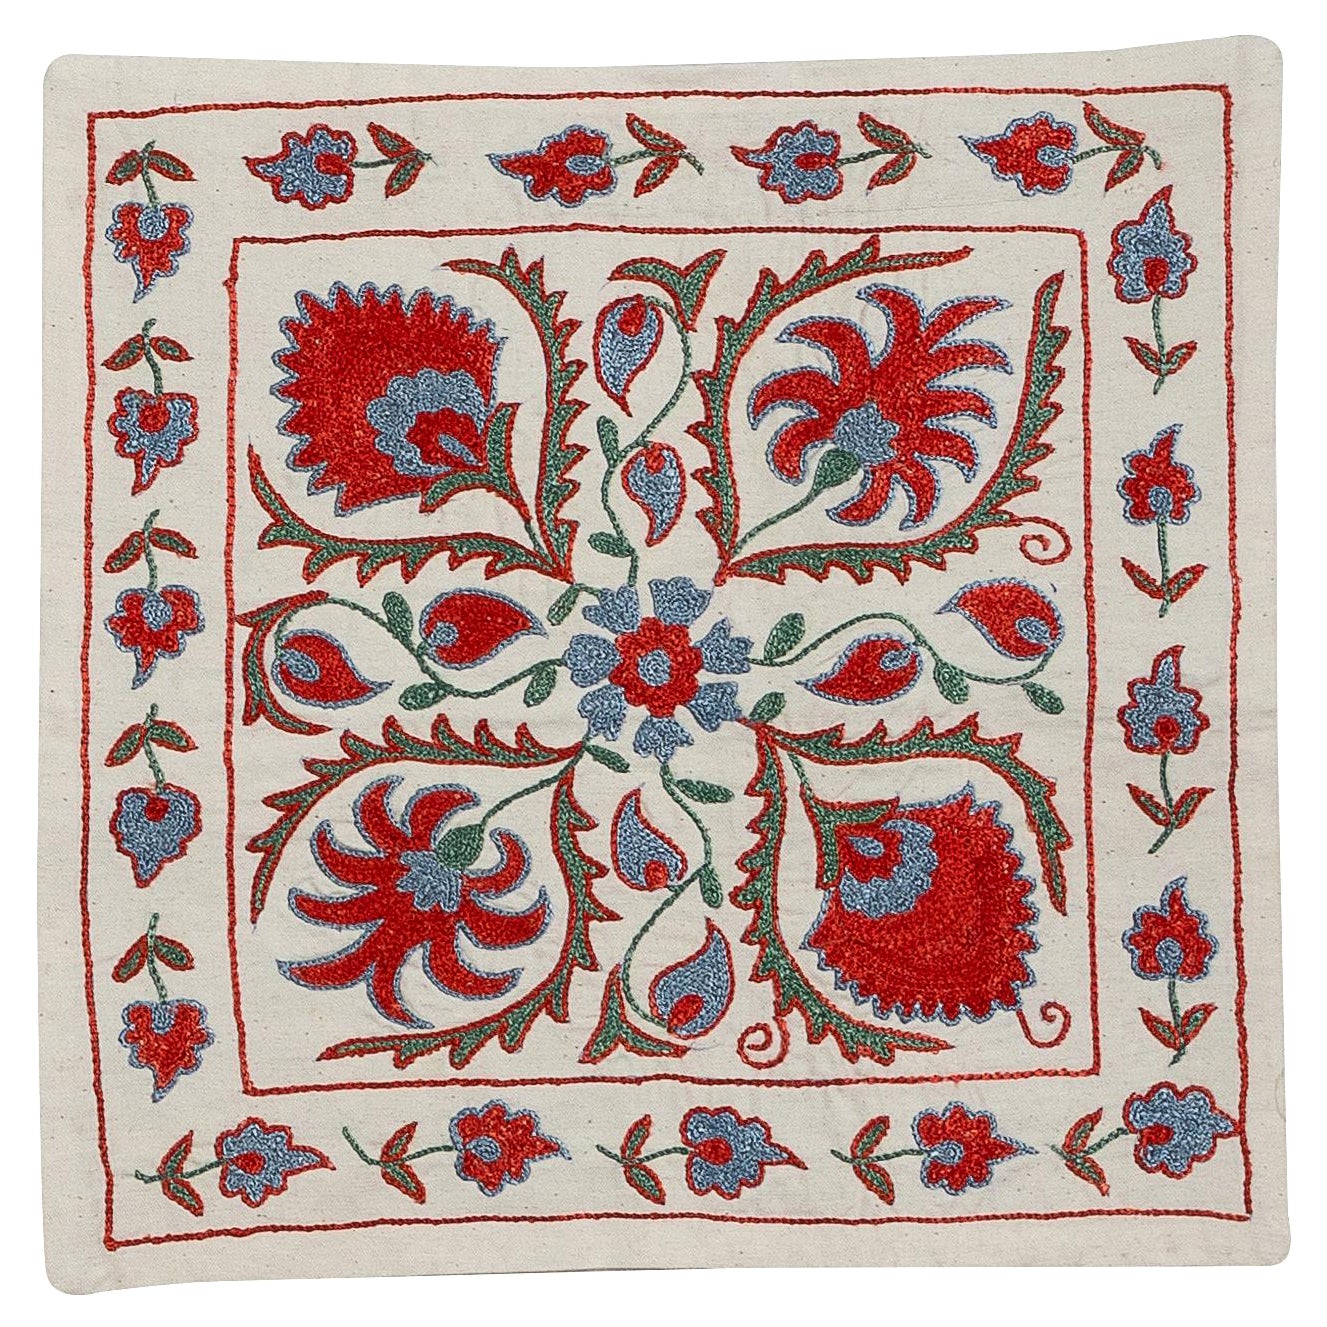 Silk Embroidery Cushion Cover, Suzani Toss Pillow. Uzbek Lace, Throw Pillow For Sale